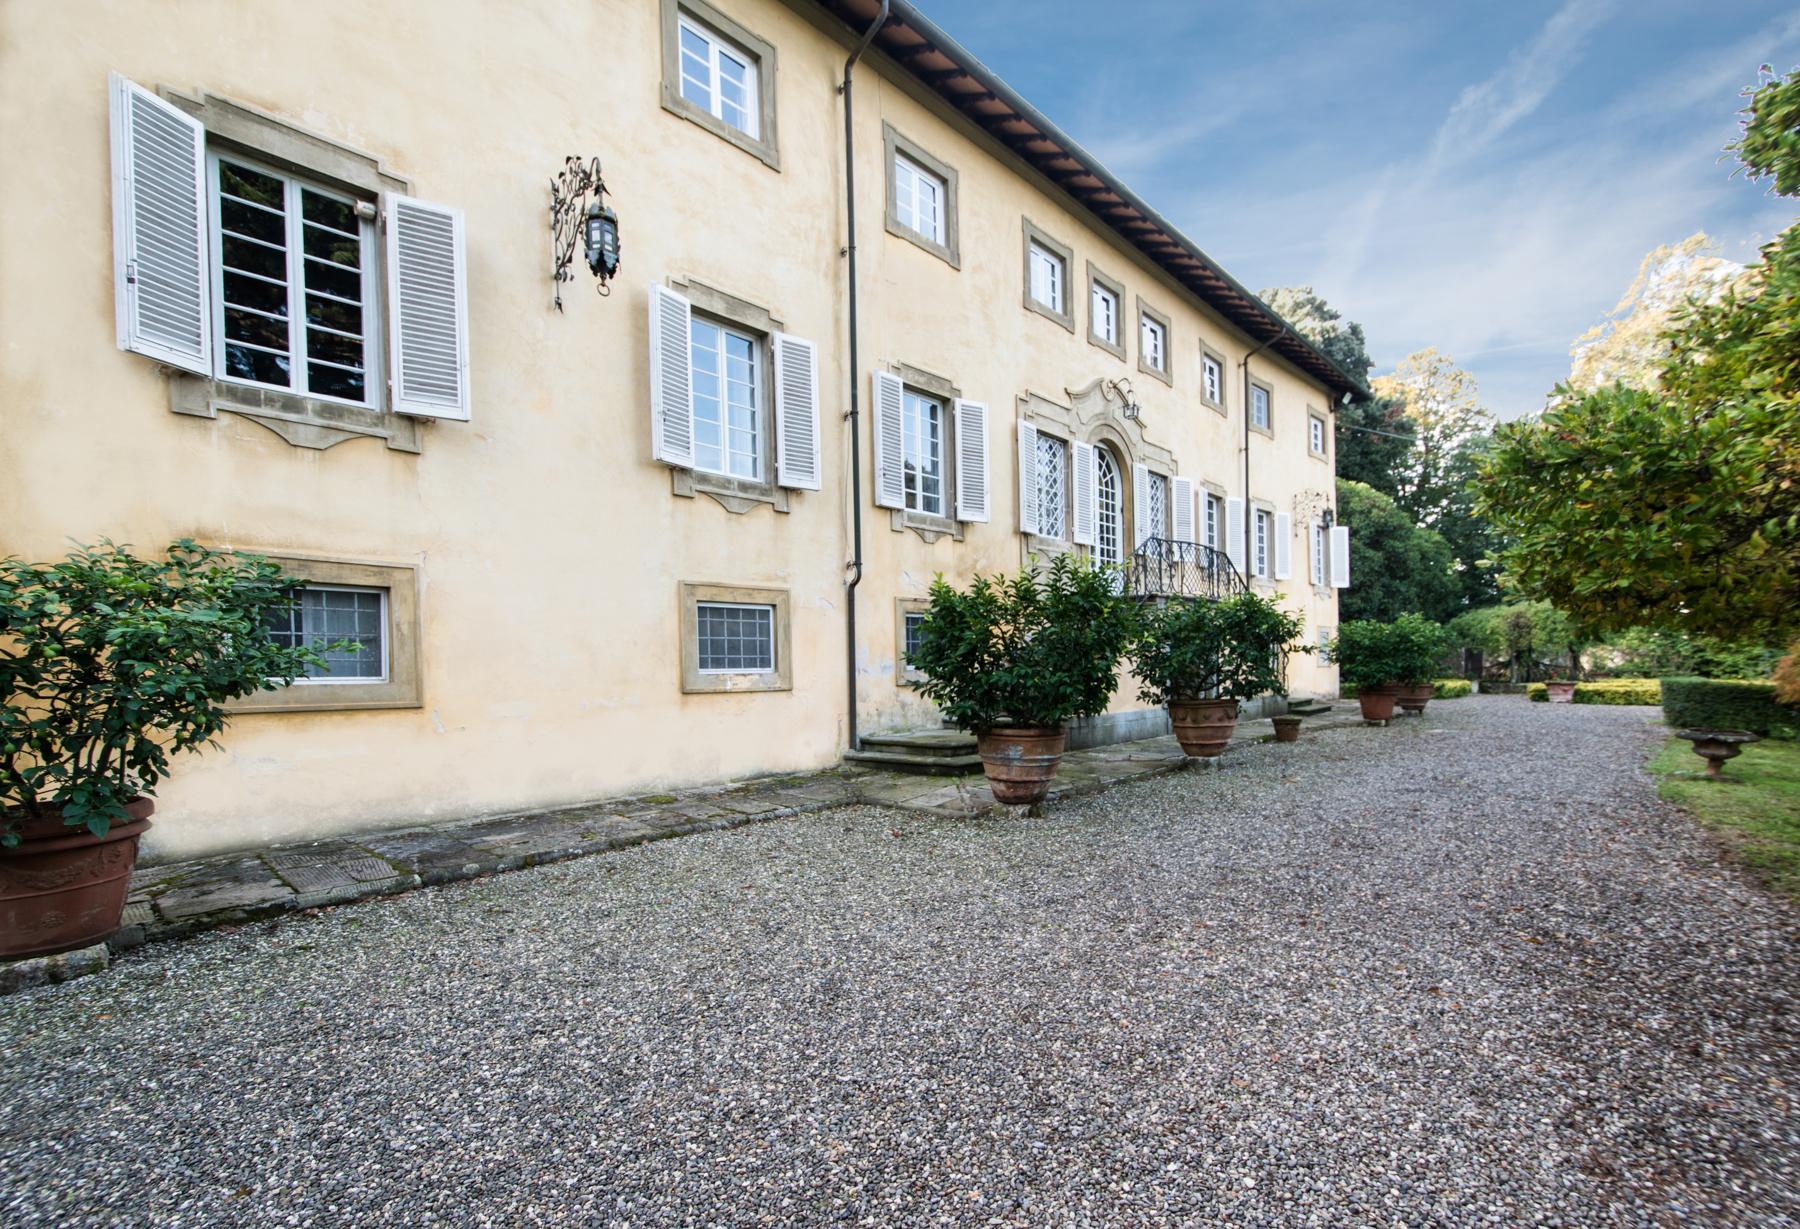 Charming 18th century villa in Lucca countryside - 4